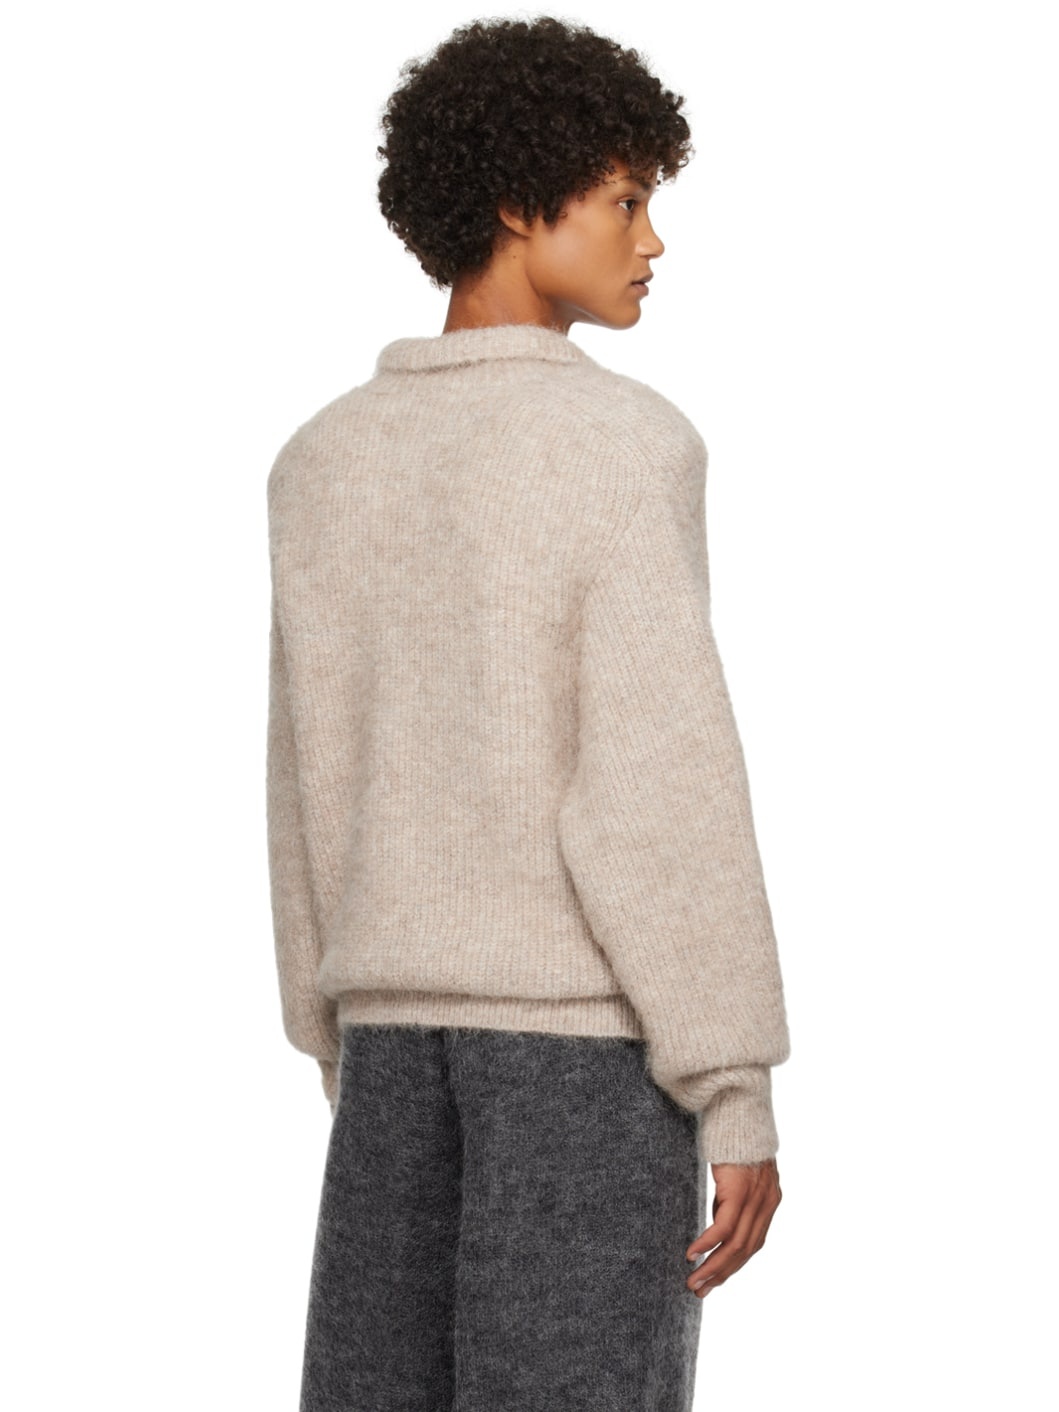 SSENSE Exclusive Taupe Harth Sweater - 3